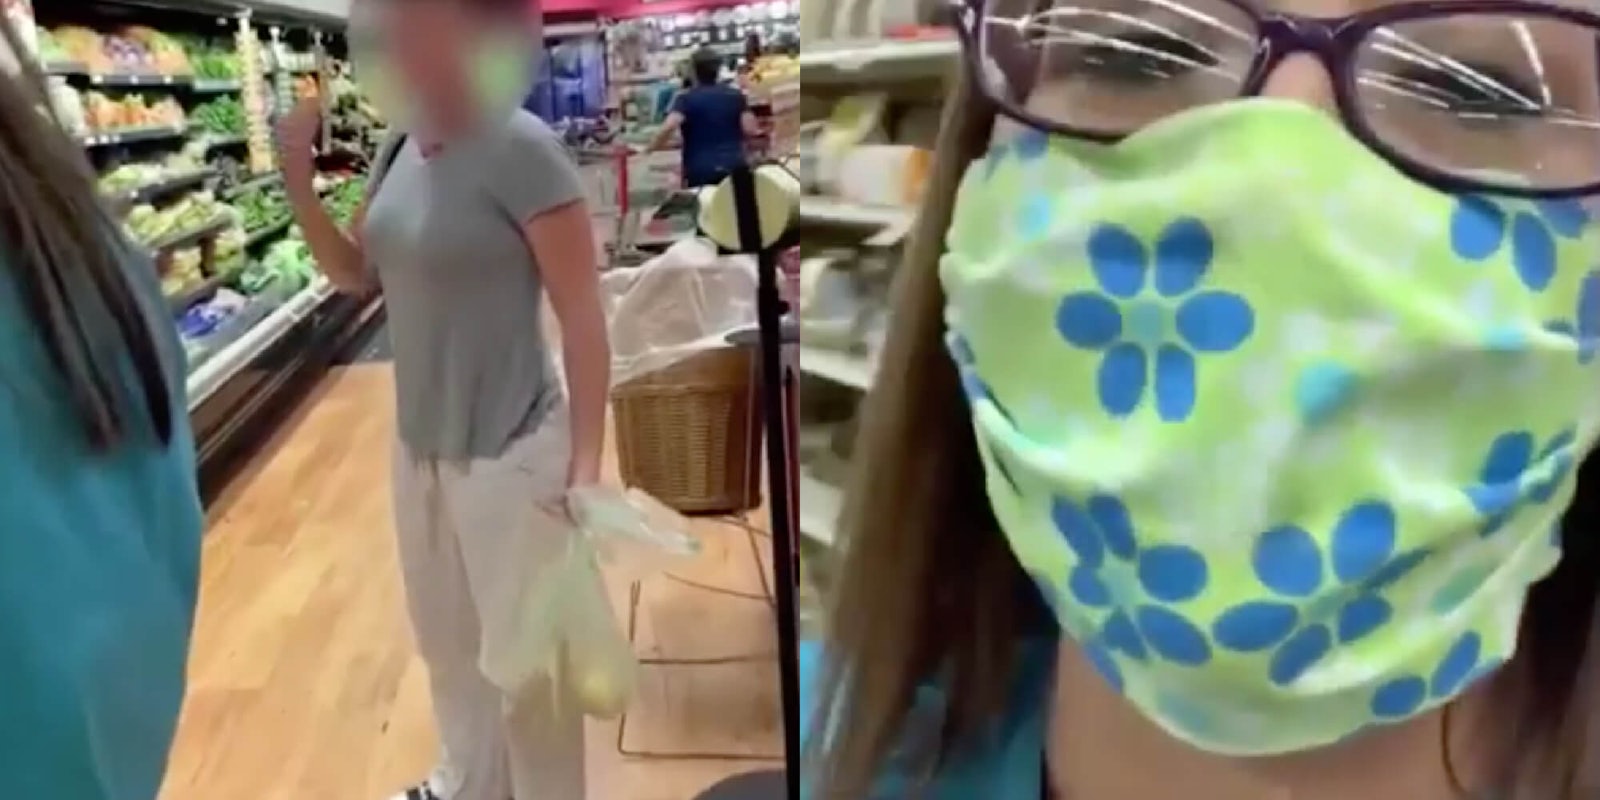 video of women in scrubs being confronted in grocery store